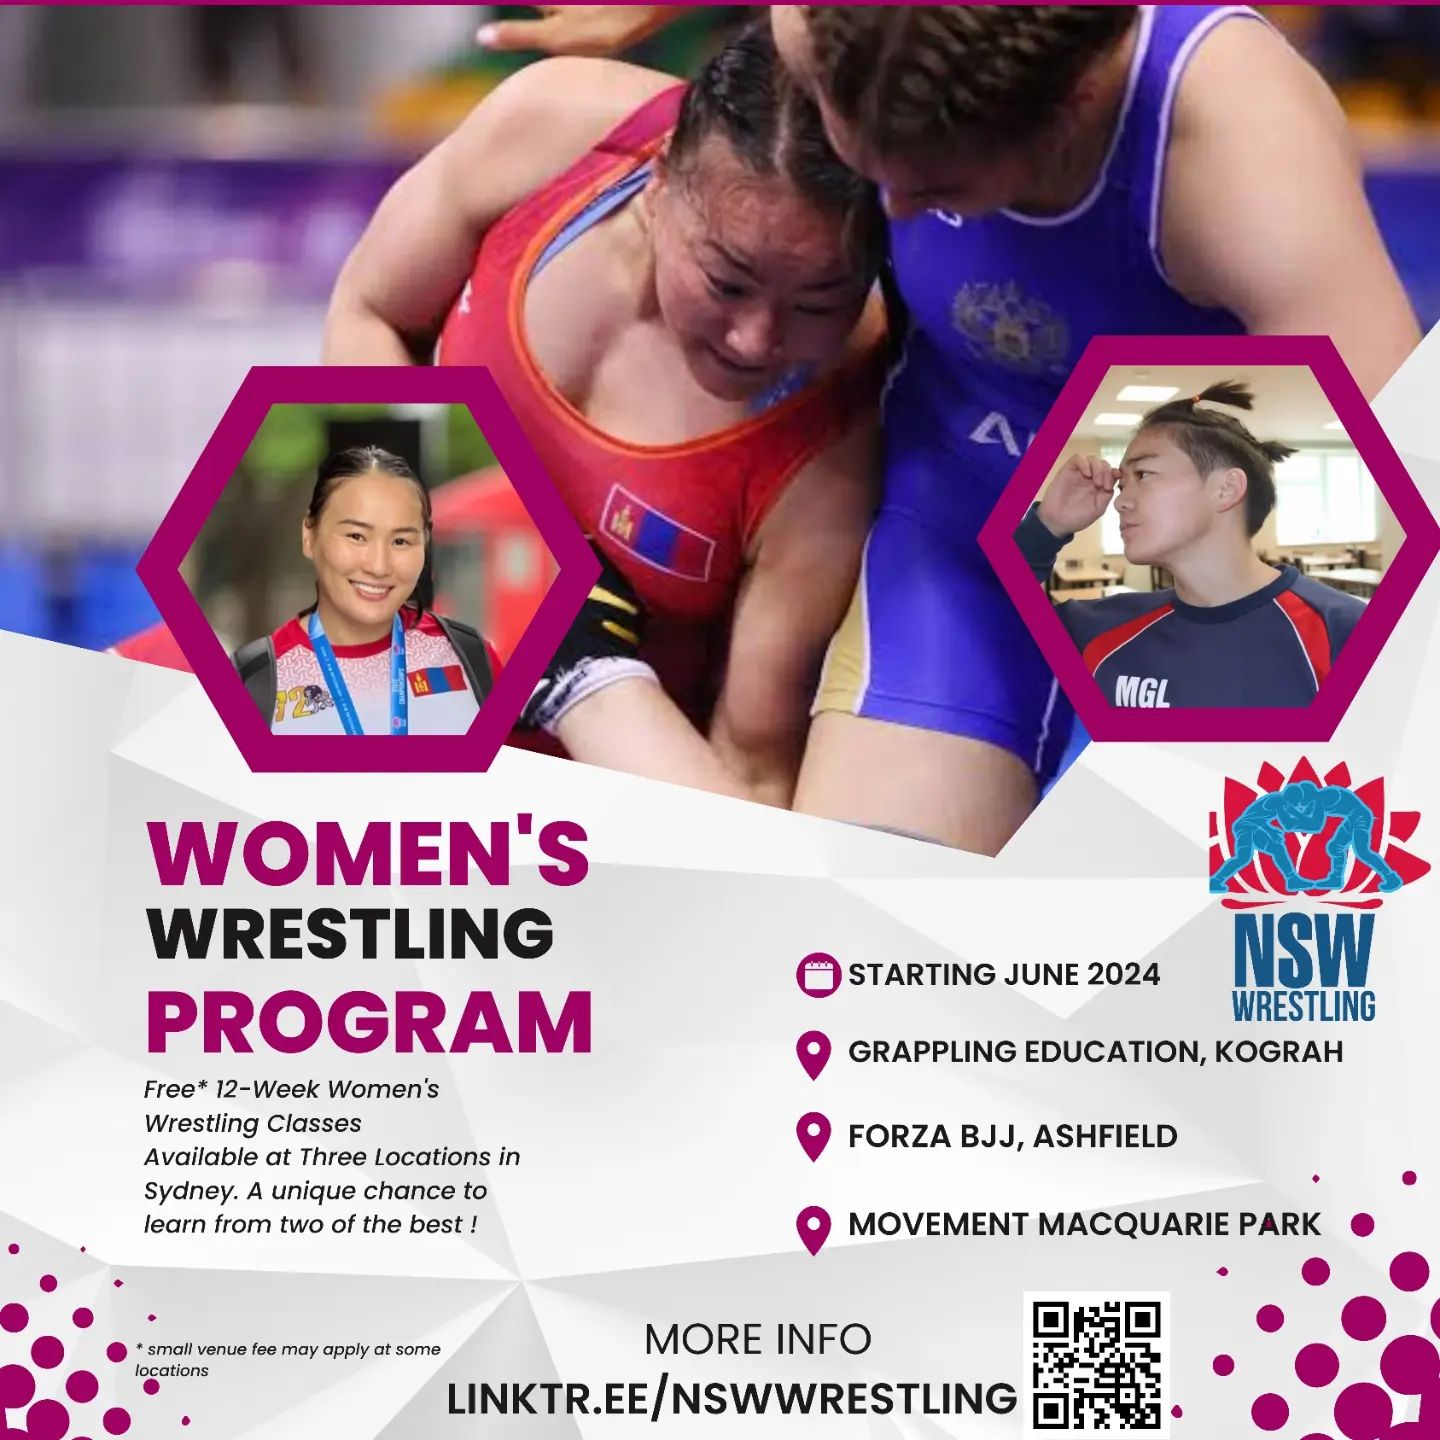 Photo by NSW Wrestling in Sydney, Australia with @hutulun_shine, @o.nasanburmaa, @grapplingeducation, @movementmartialarts, @wrestling.australia, @forzajiujitsu, @mlackpt, and @sydneywrestlingacademy. May be an image of ‎3 people and ‎text that says '‎MGL STARTINGJUNE2024 STARTING JUNE 2024 WOMEN'S WRESTLING PROGRAM Free* 12-Week Women's Wrestling Classes Available at Three Locations in Sydney. unique chance to to Jearn from two of the best! NSW WRESTLING GRAPPLING EDUCATION, KOGRAH FORZA BJJ, ASHFIELD 好下さい ሃማግህ (연전 נקרד noy atiar MOVEMENT MACQUARIE PARK at ច០កា MORE INFO LINKTR.EE/NSWWRESTLING‎'‎‎.